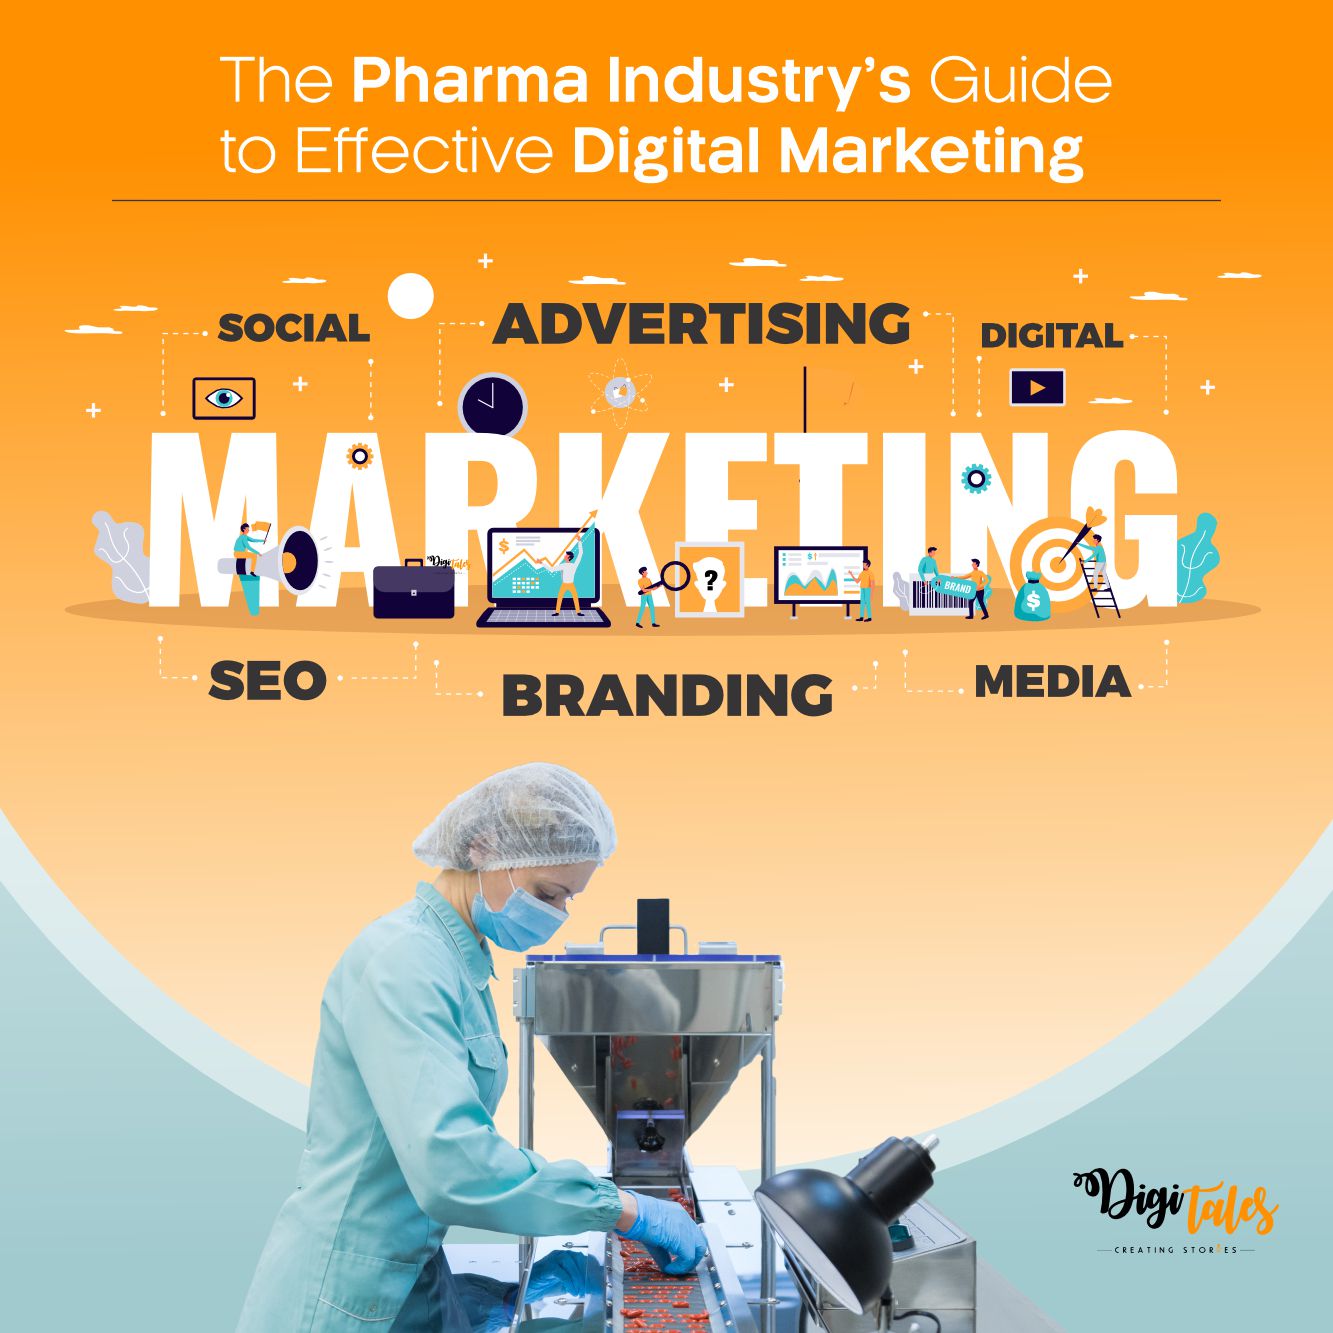 The Pharma Industry’s Guide to Effective Digital Marketing